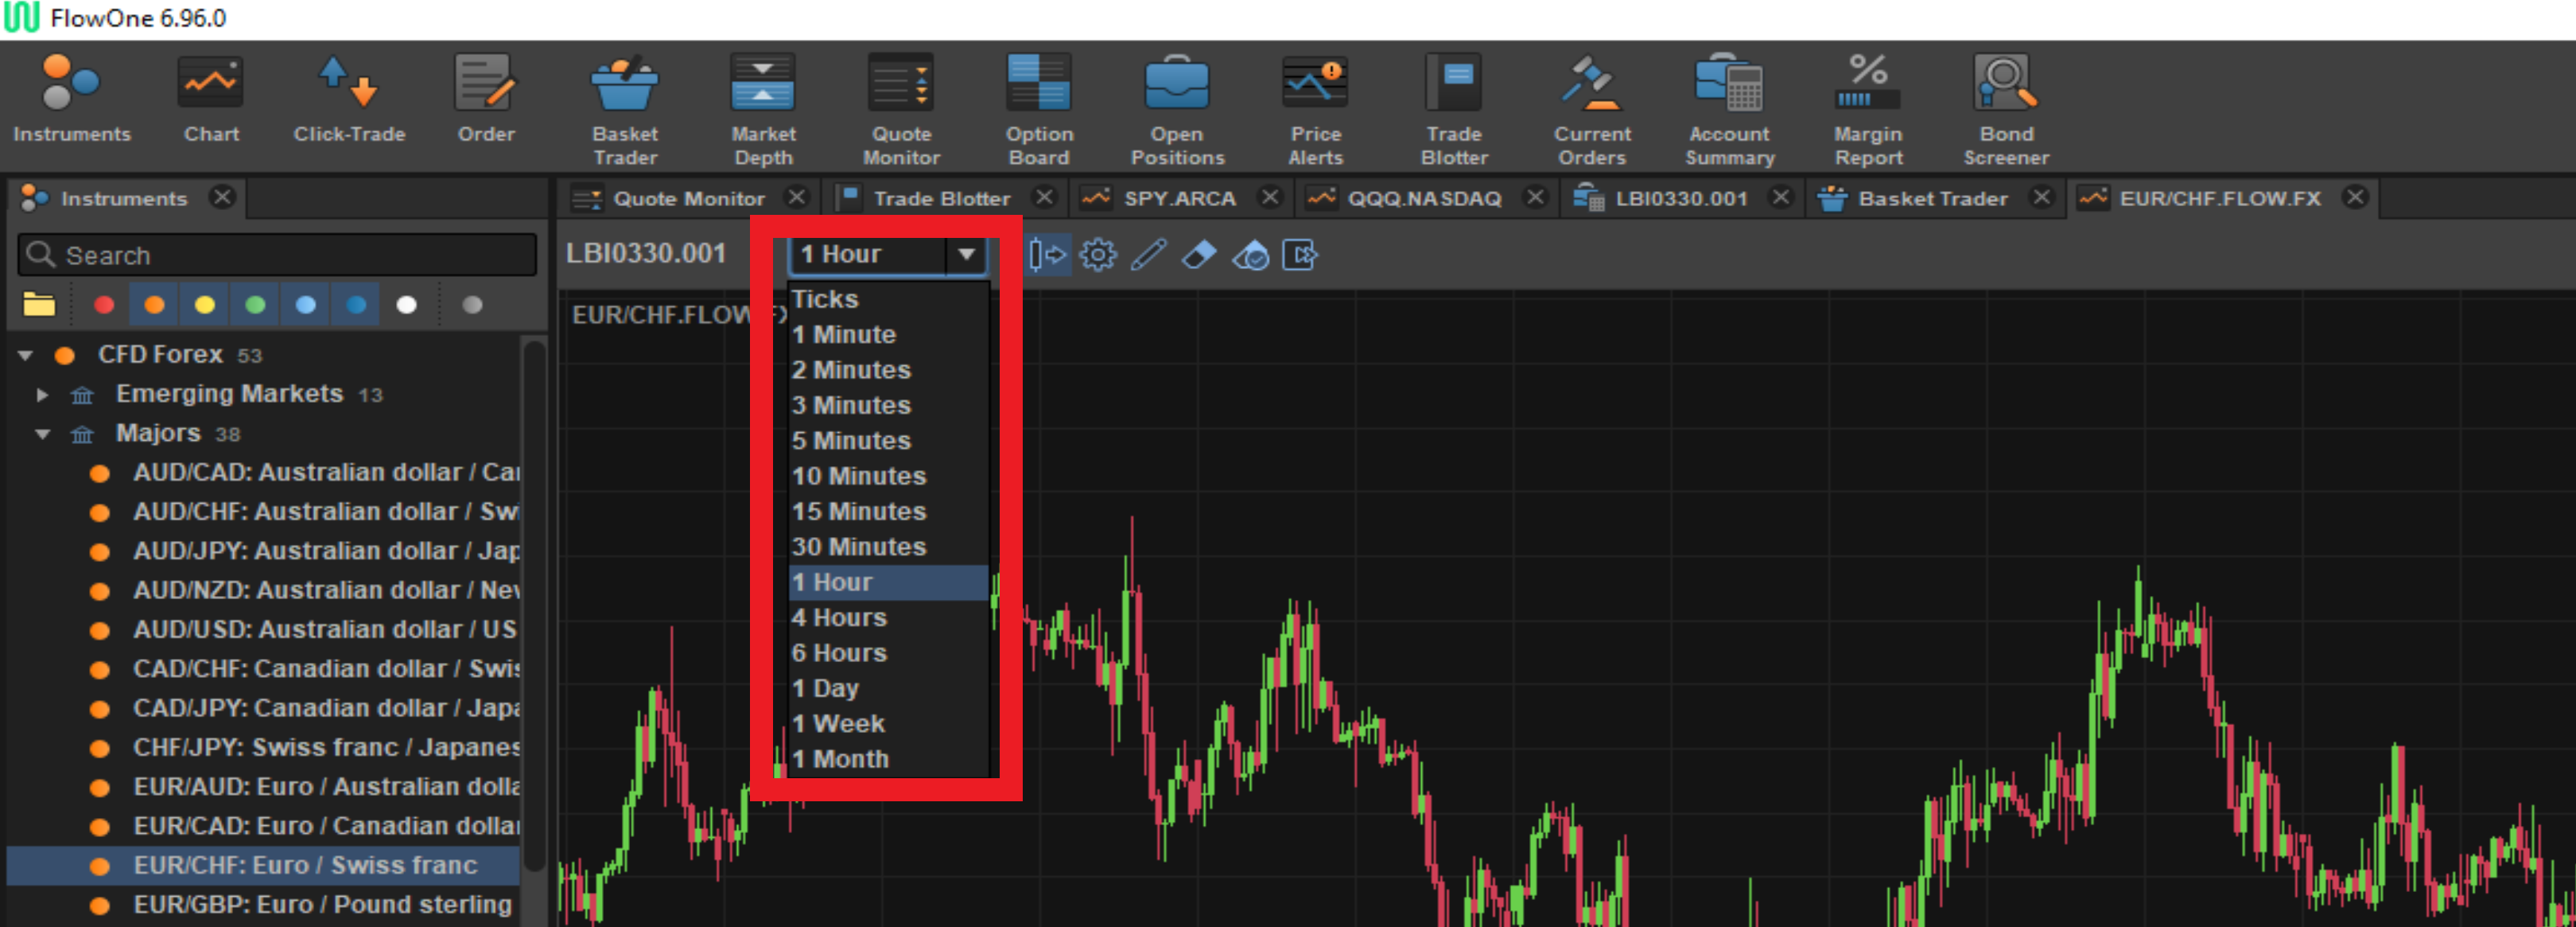 What is the best timeframe chart to trade forex for beginners?